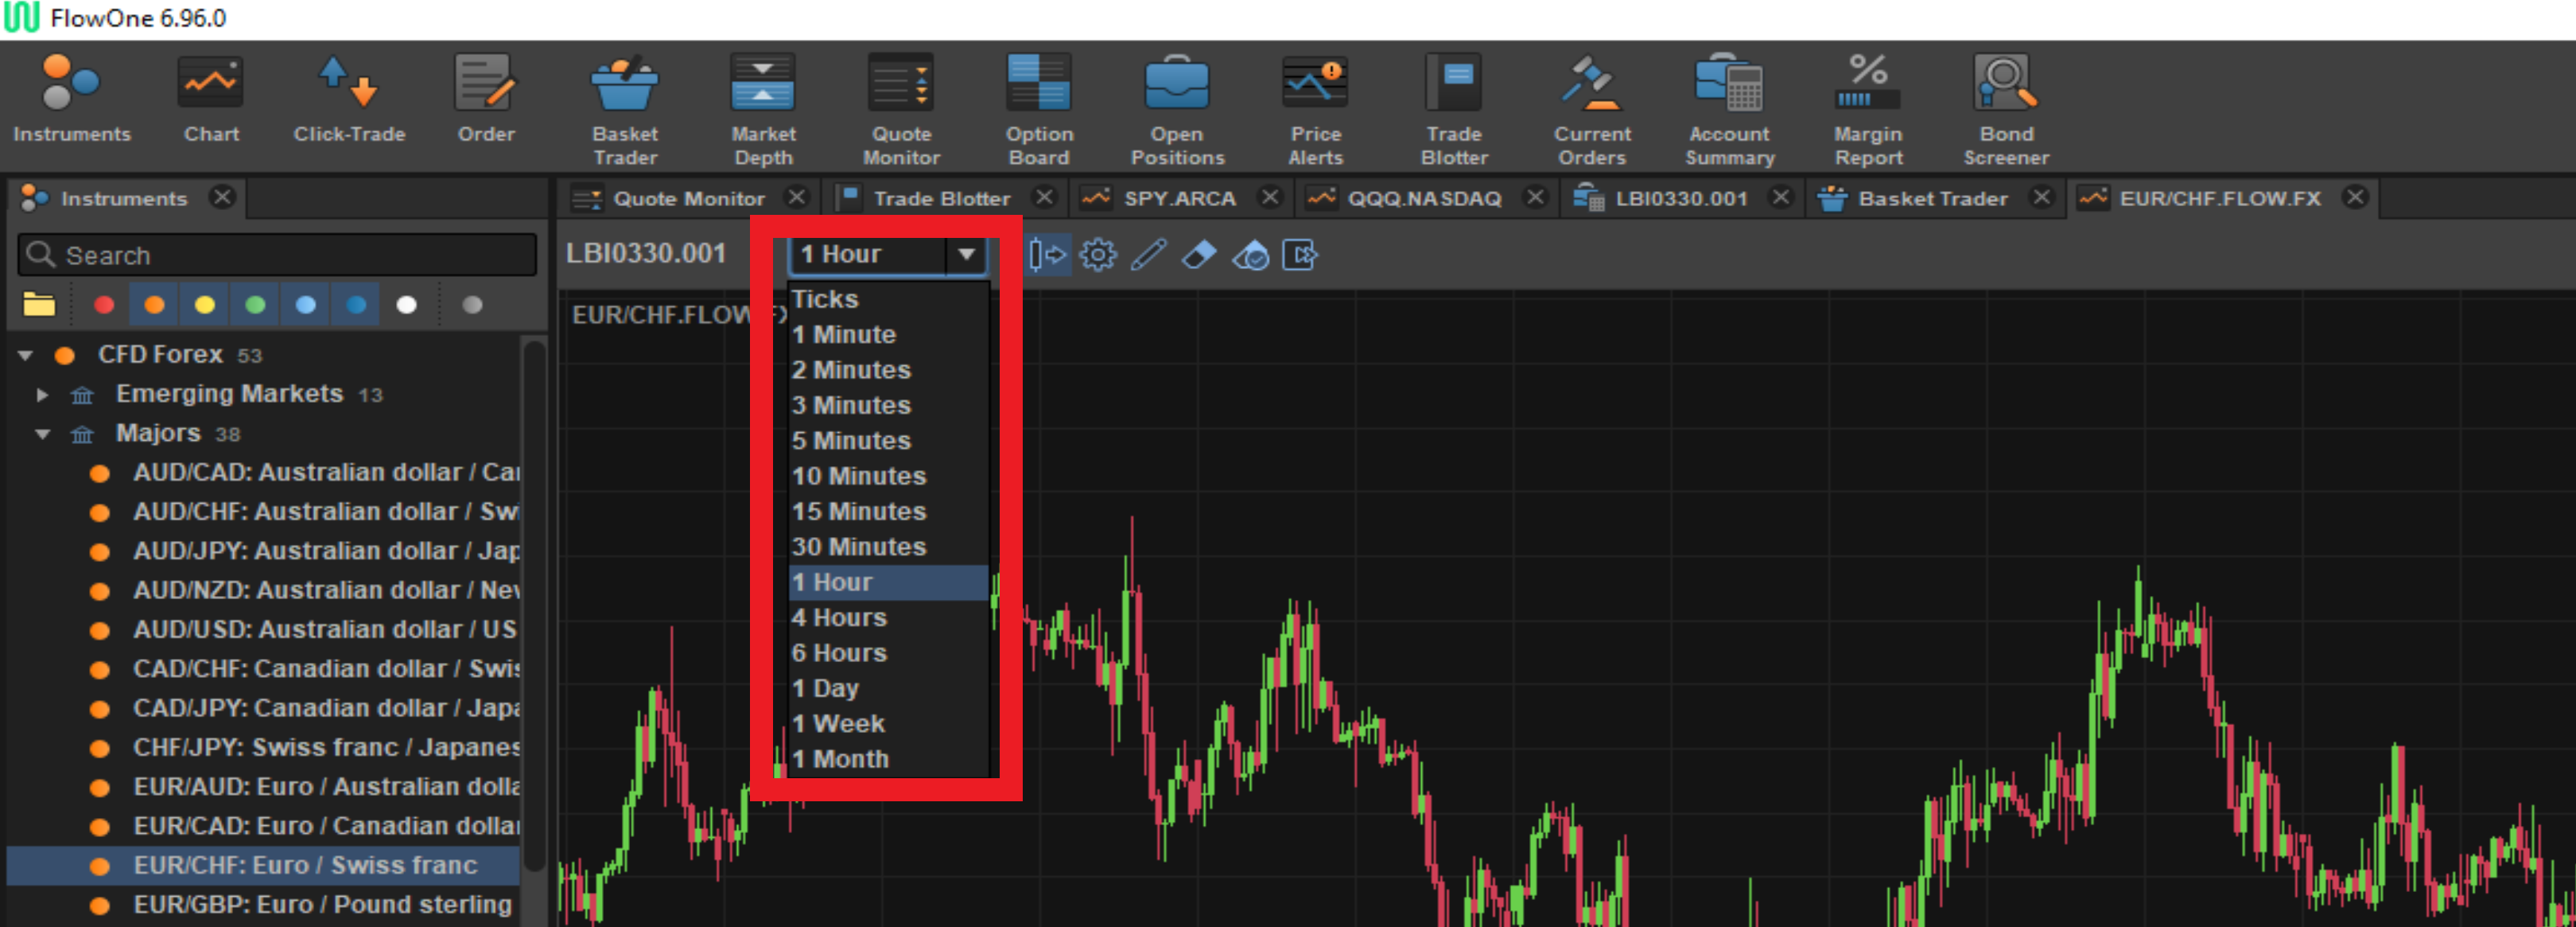 What is the best timeframe chart to trade forex for beginners?